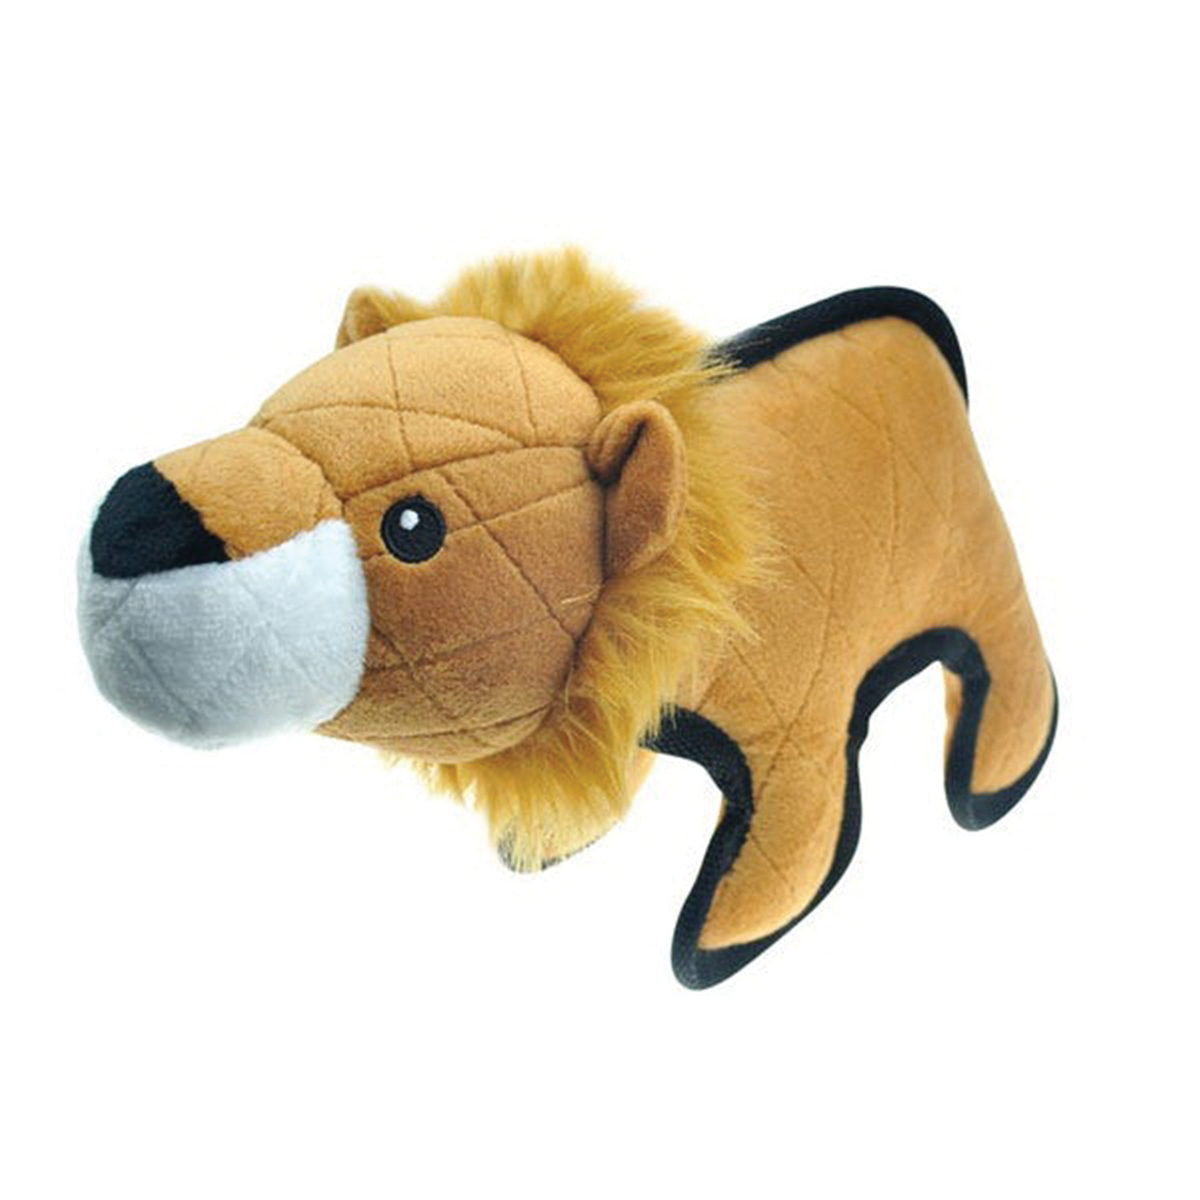 US2021 18 13 Dog Toy, L, Chew Toy, Tuffimals Lion